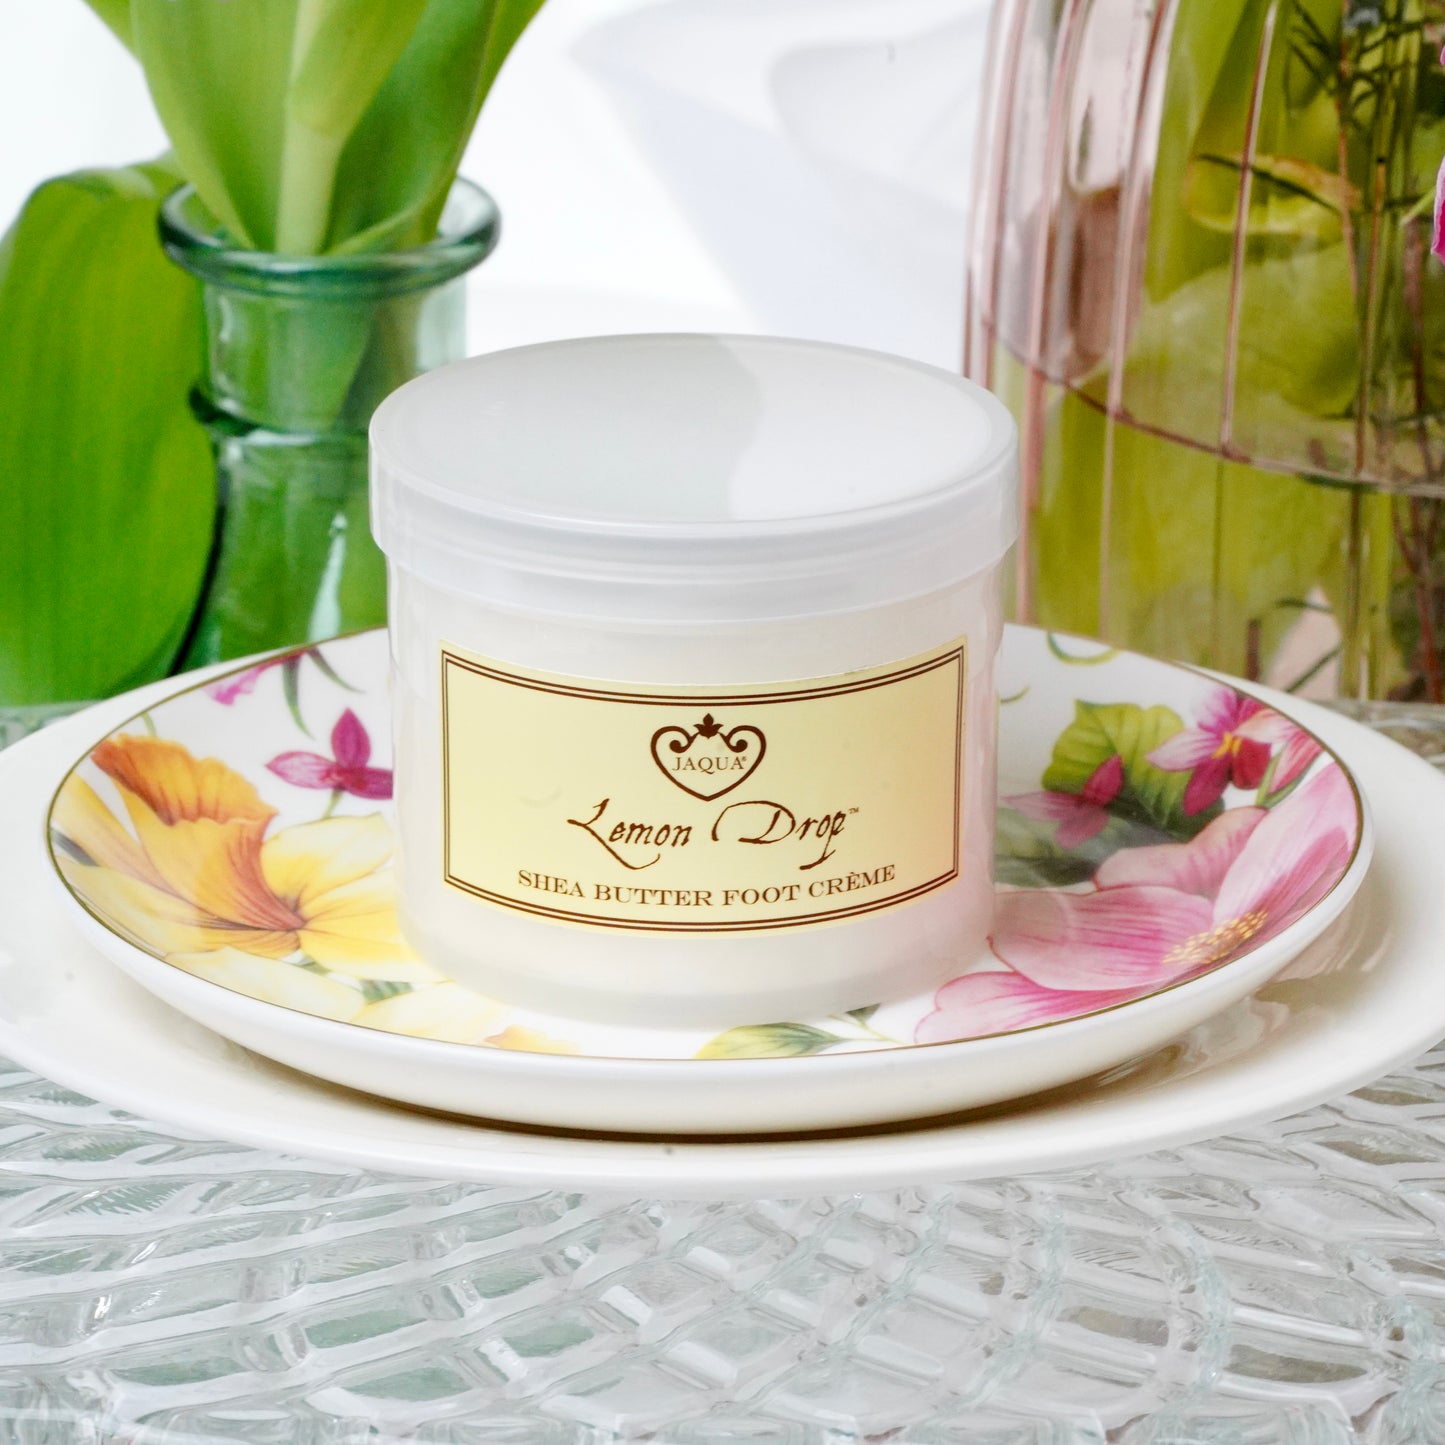 Lemon Scented Foot Cream with Shea Butter